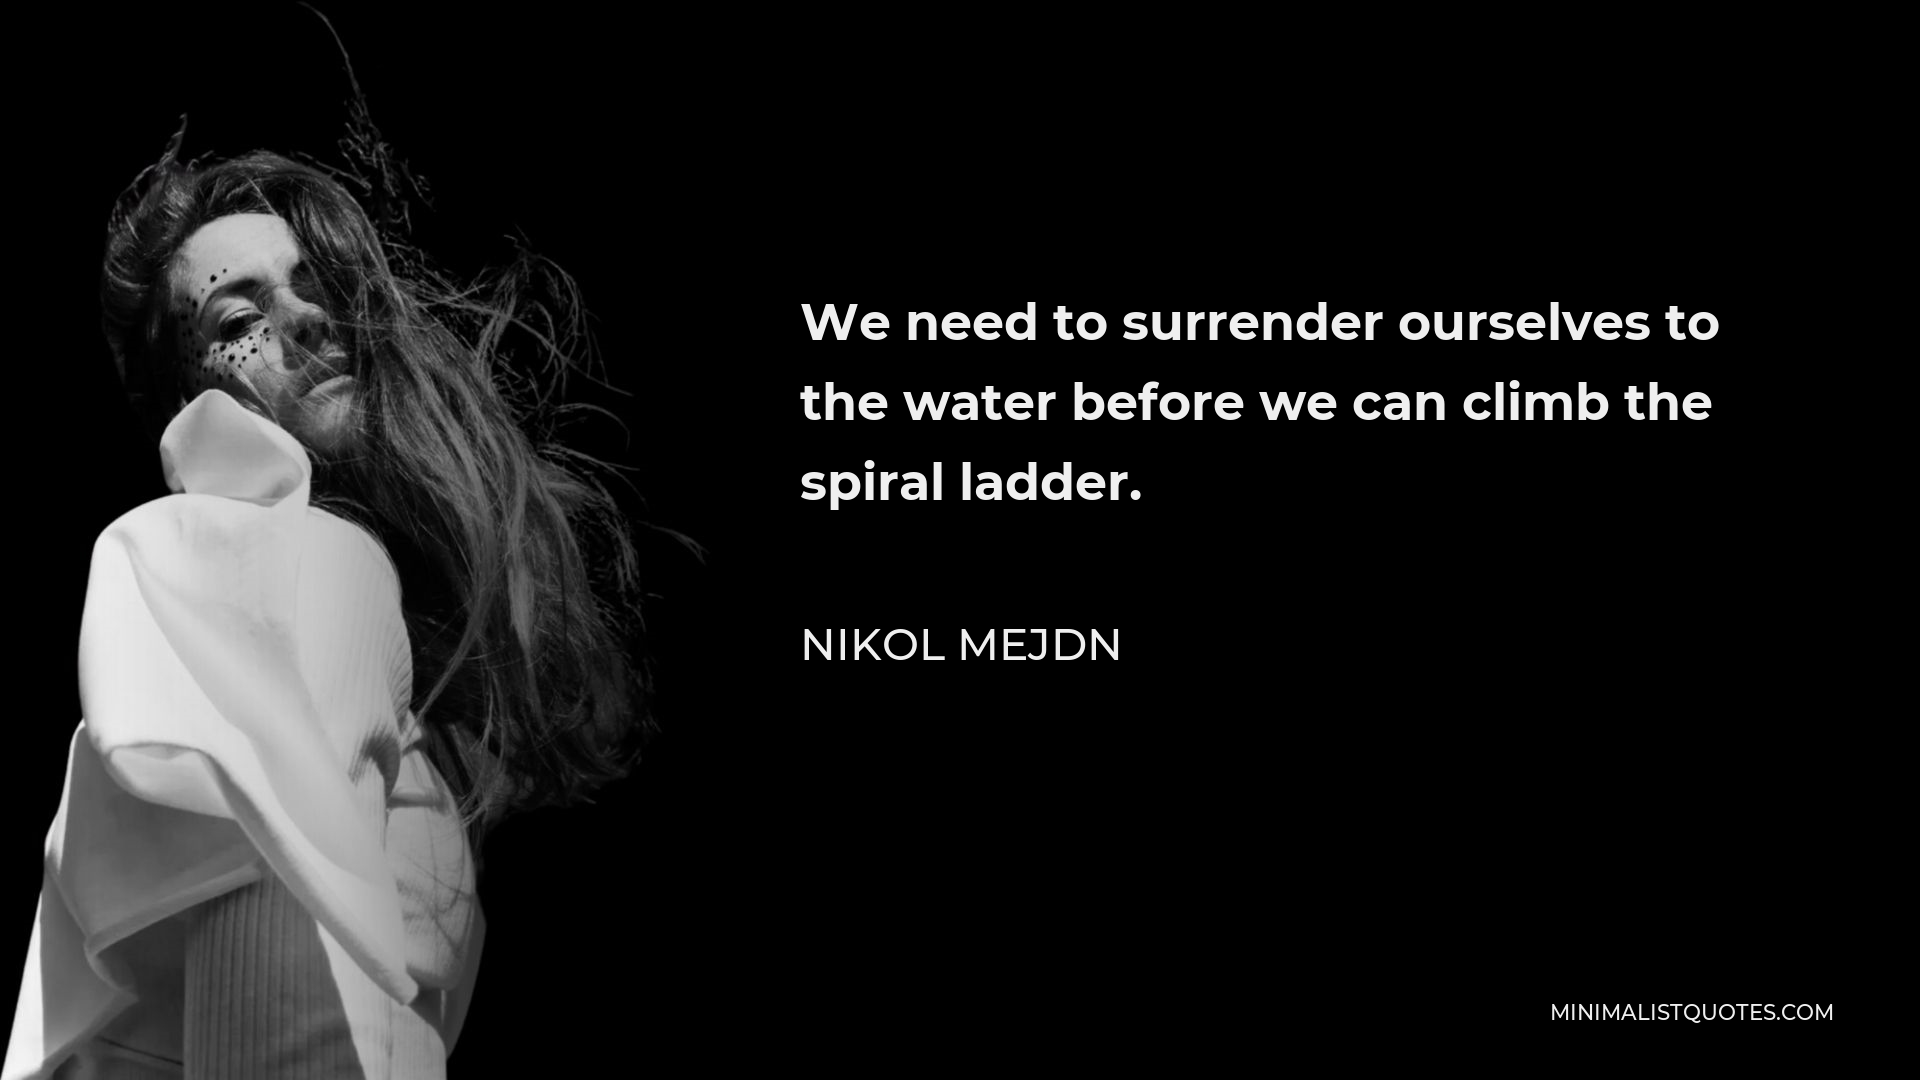 Nikol Mejdn Quote - We need to surrender ourselves to the water before we can climb the spiral ladder.